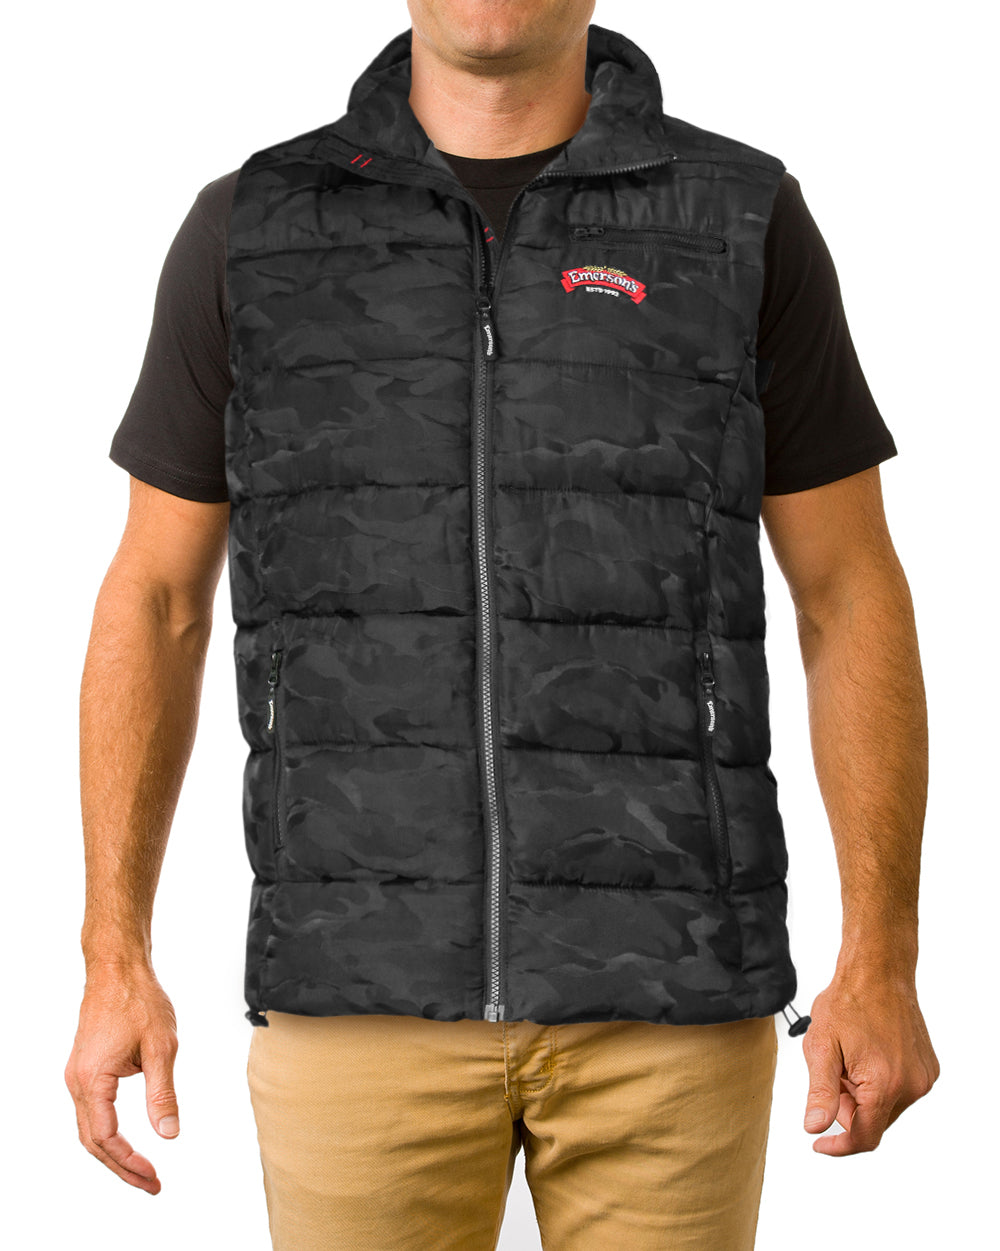 Emerson's Camo Puffer Vest -  Beer Gear Apparel & Merchandise - speights - lion red - vb - tokyo dry merch